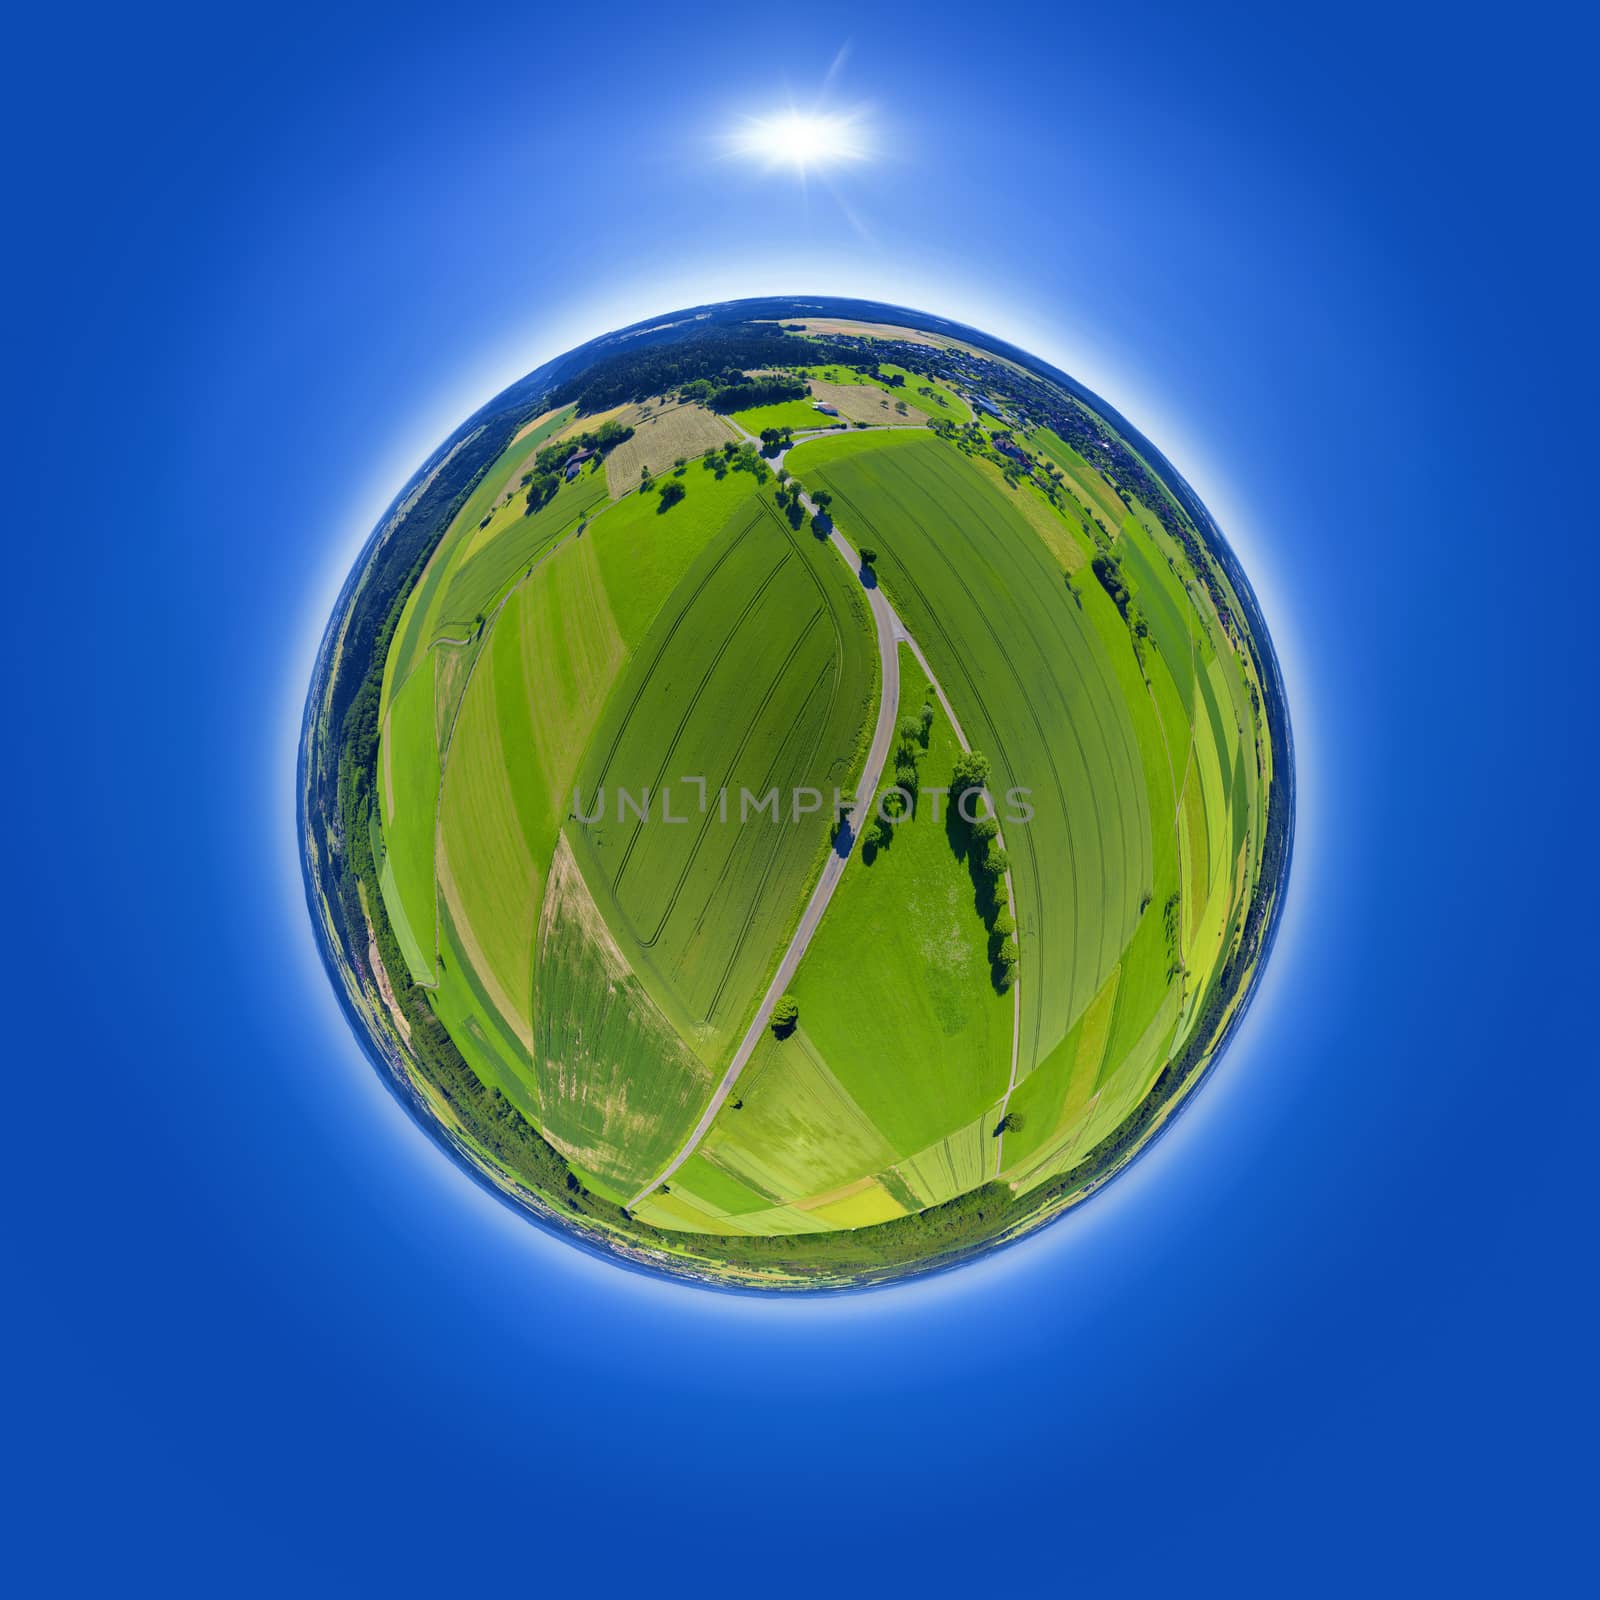 An image of a little planet rural fields and road